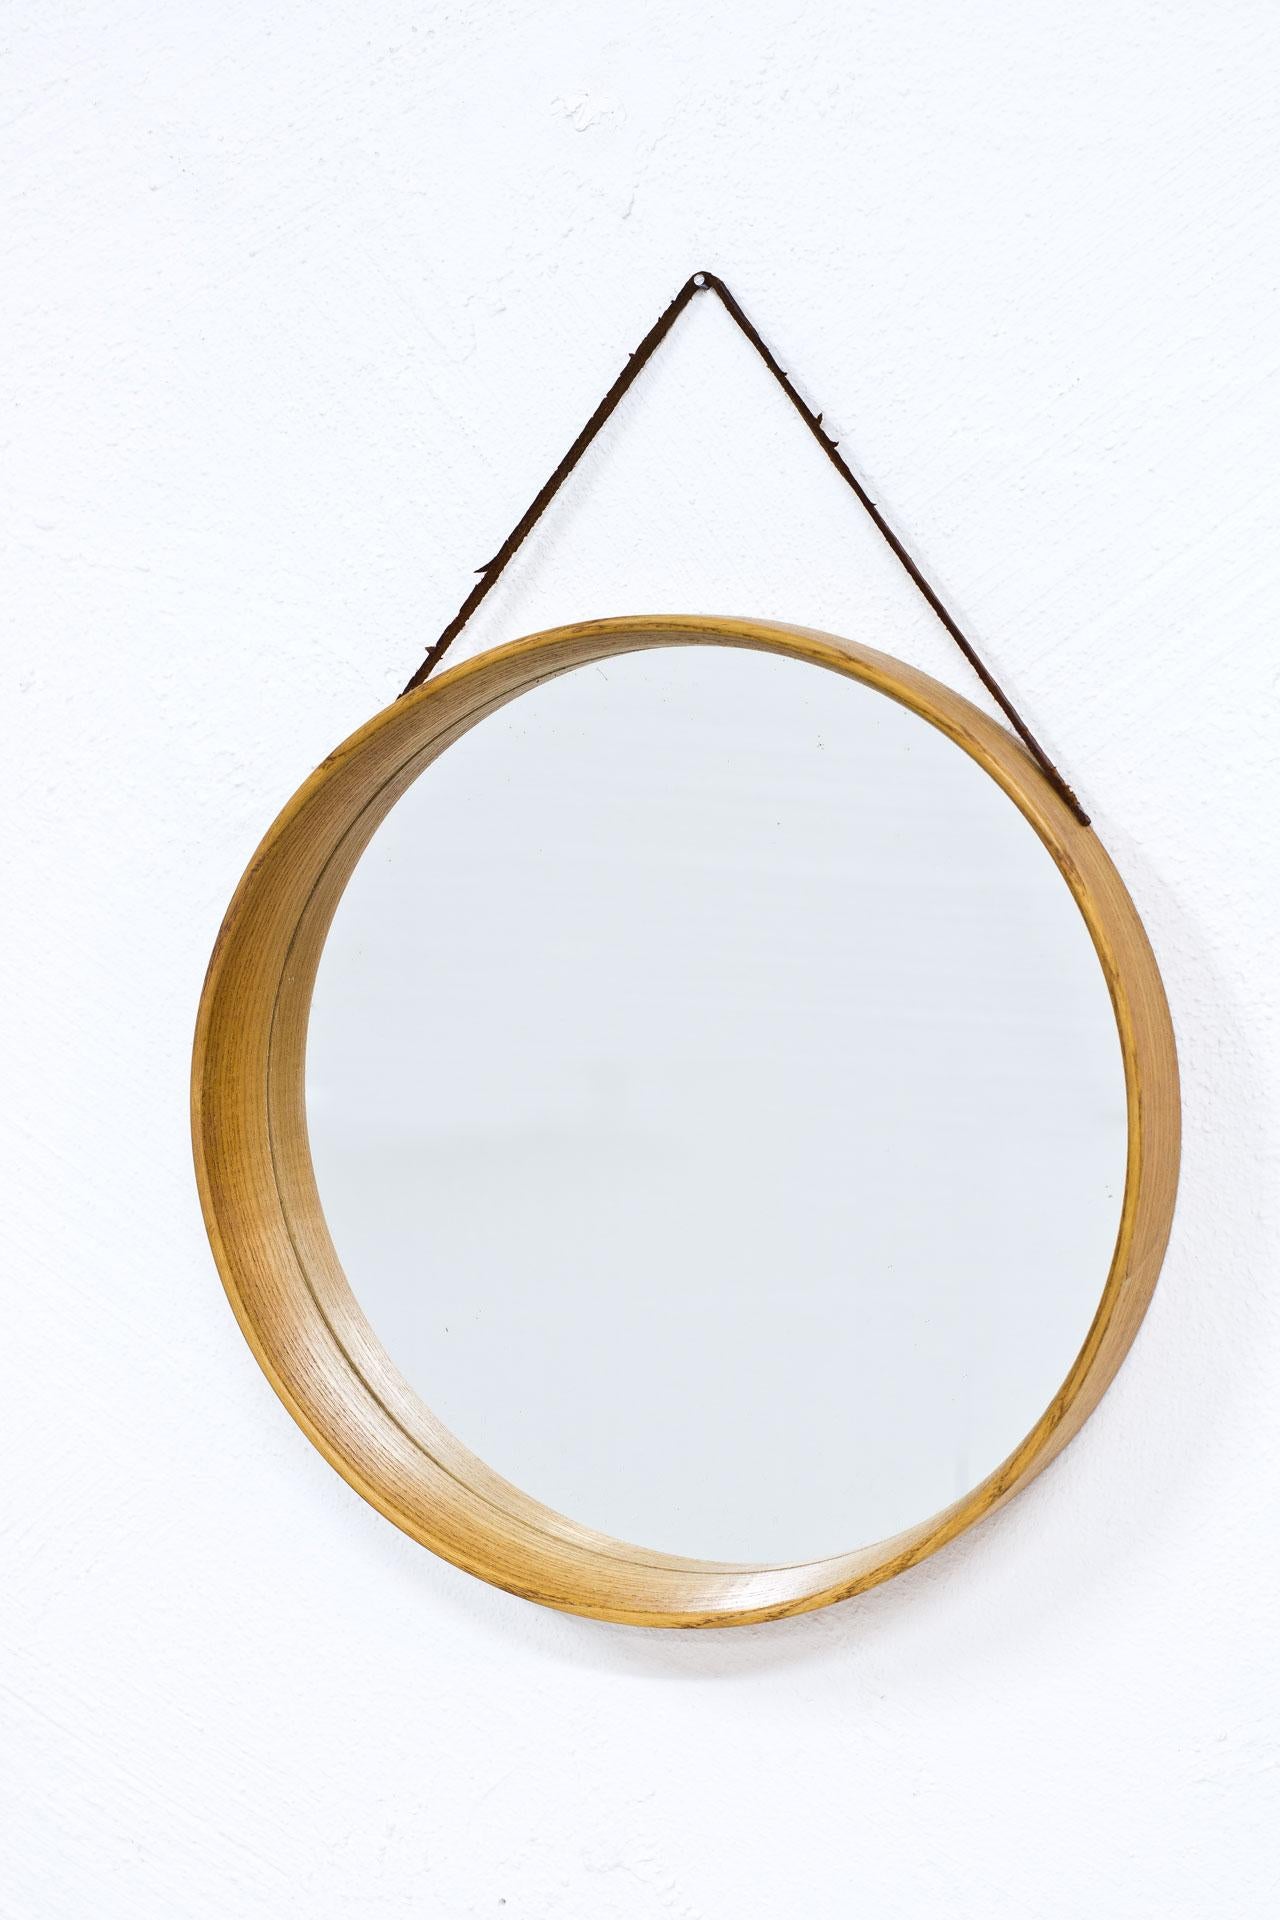 Midcentury round wall mirror manufactured in Sweden. Made from oak with leather strap.